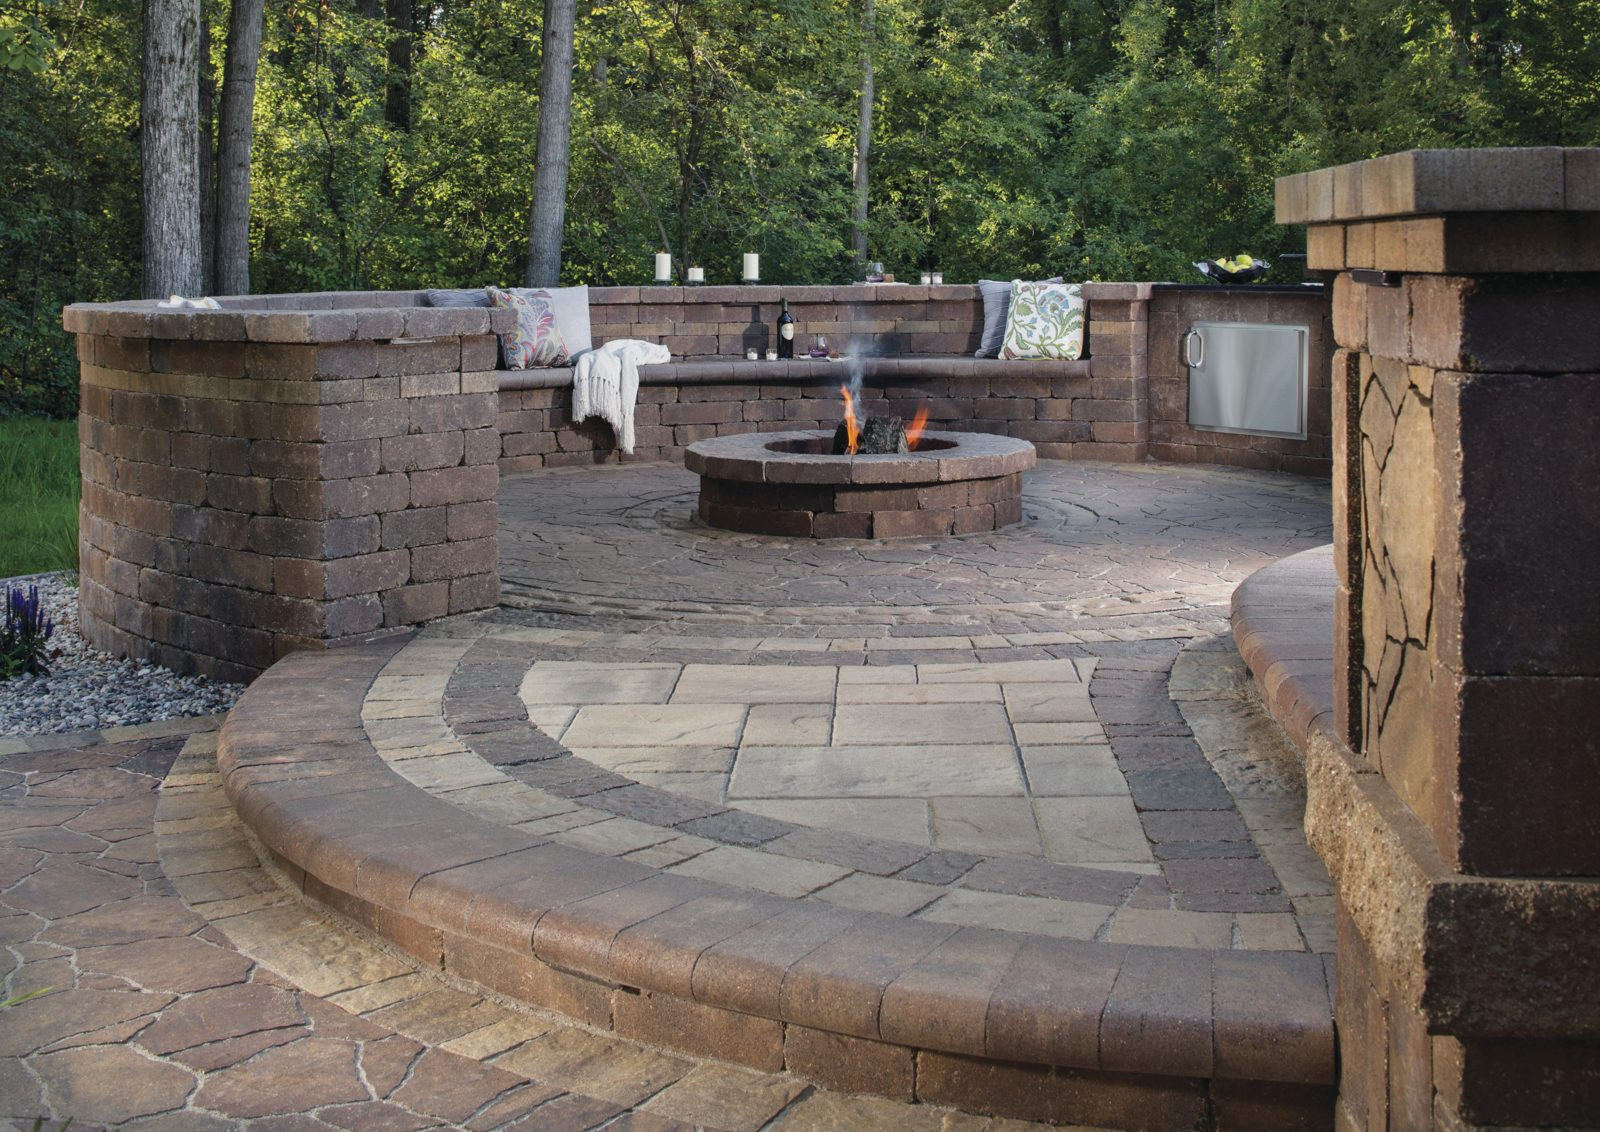 Fire Pit On Patio
 Turn Up the Heat with These Cozy Fire Pit Patio Design